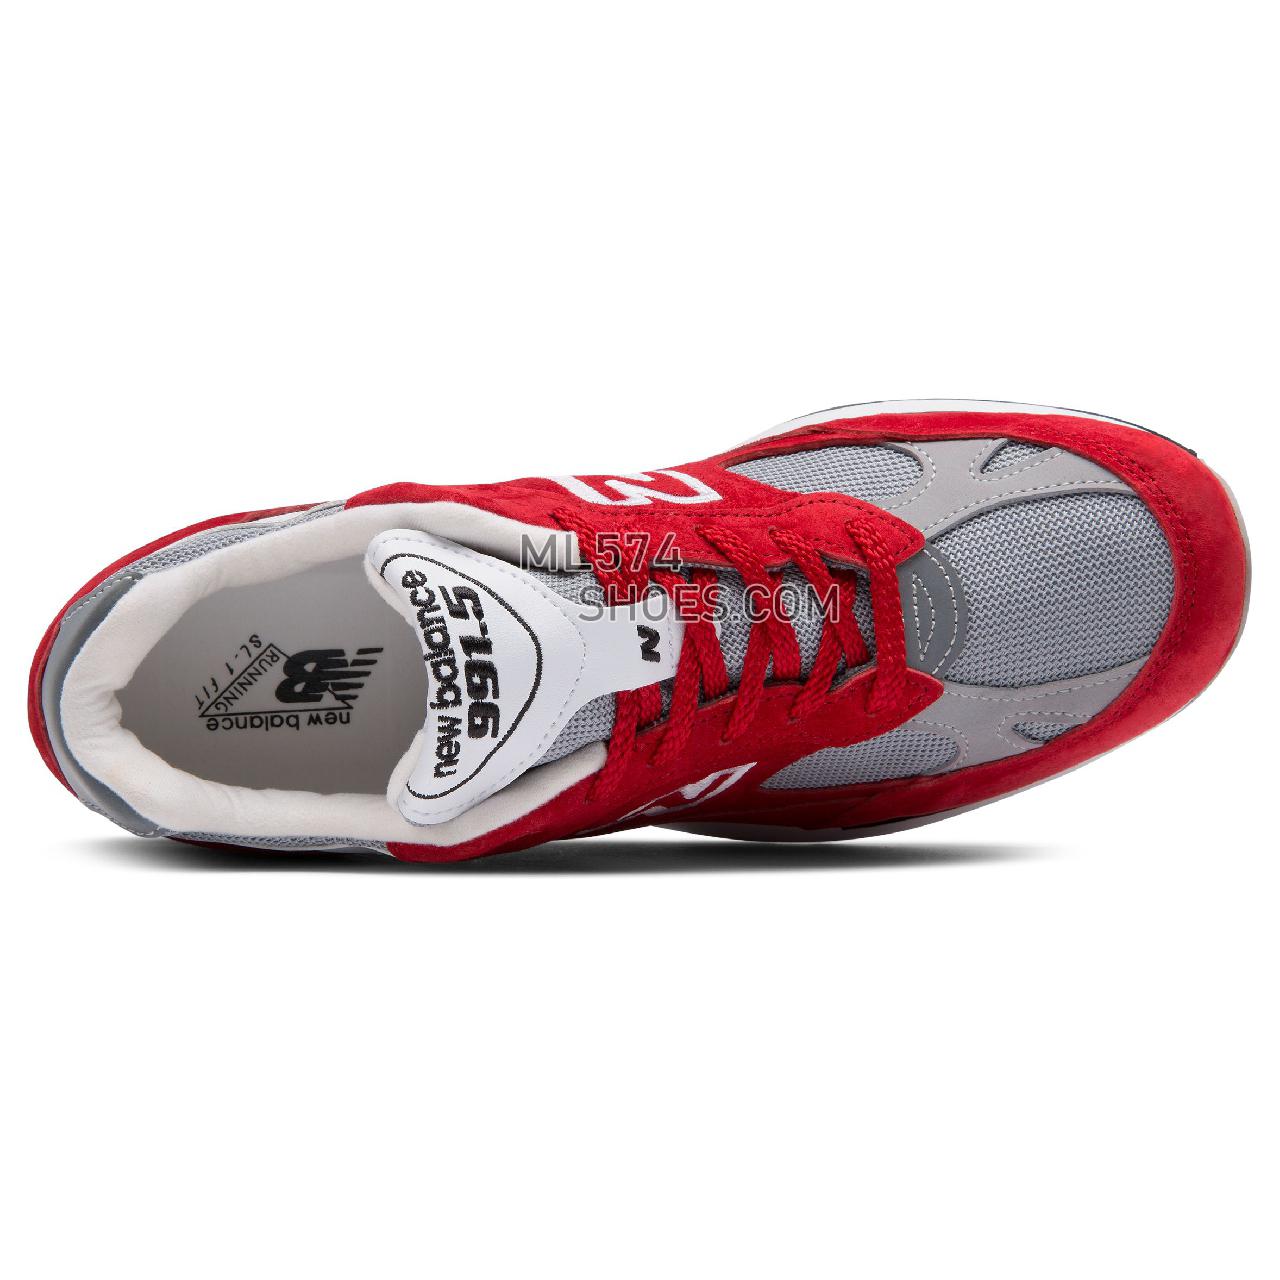 New Balance 991.5 Made in UK - Men's 9915 - Classic Red with Grey and White - M9915AA